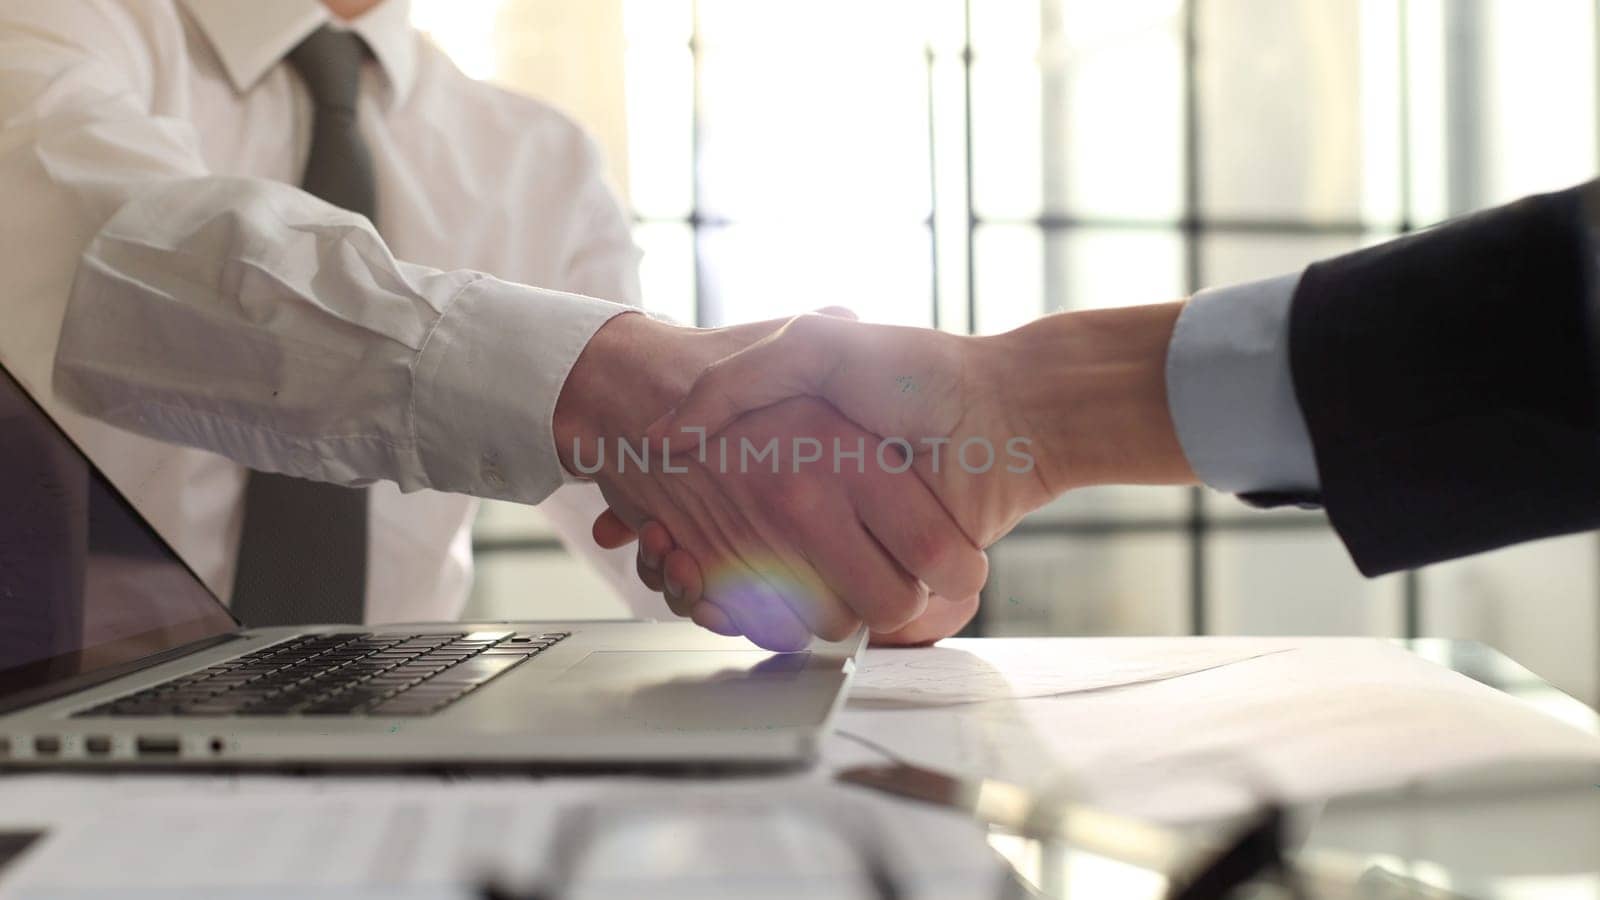 Handshake after a successful deal at a meeting.